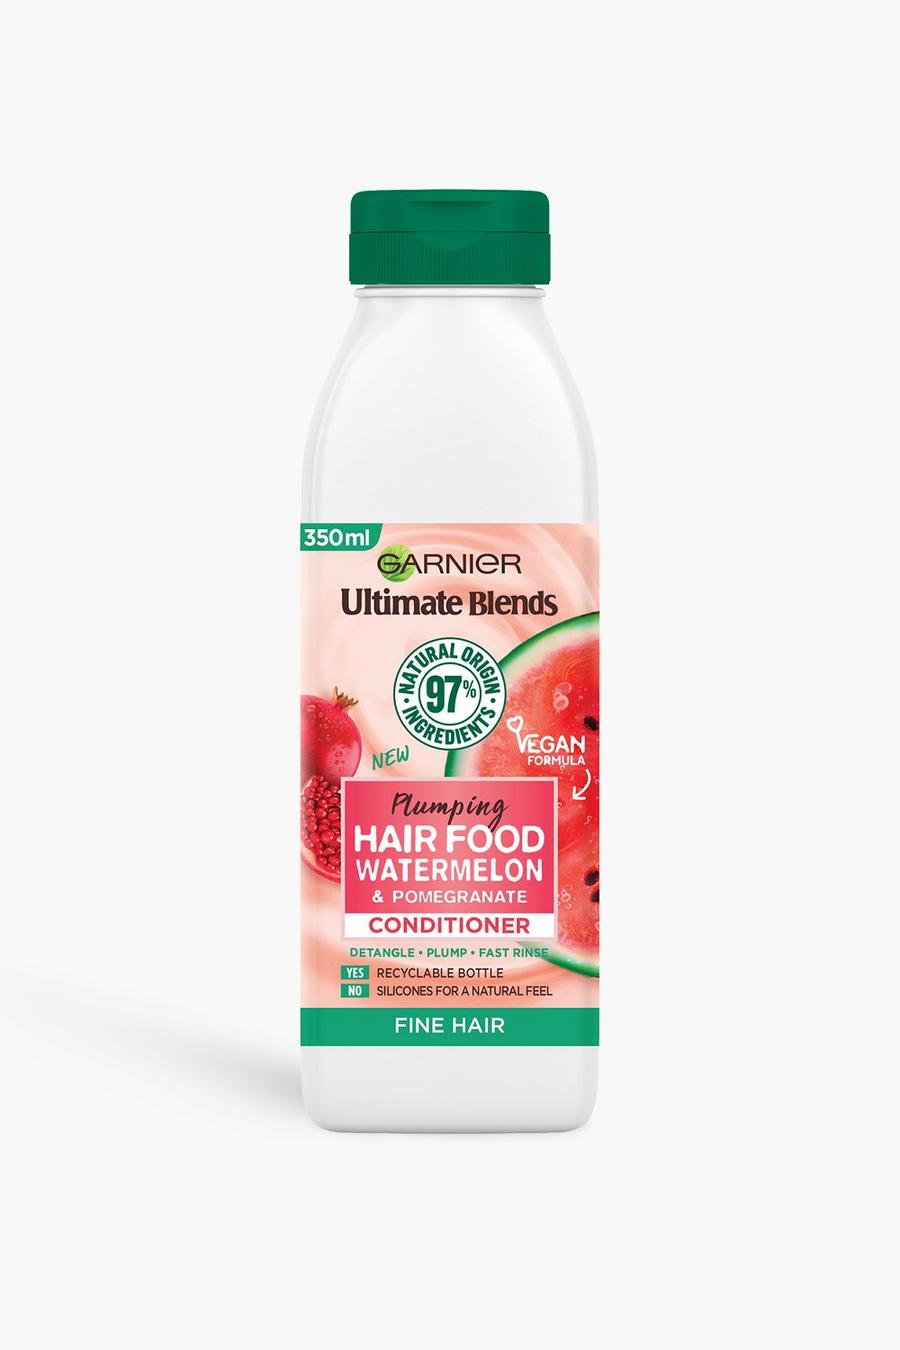 Multi Garnier Ultimate Blends Plumping Hair Food Watermelon Conditioner for Fine Hair 350ml